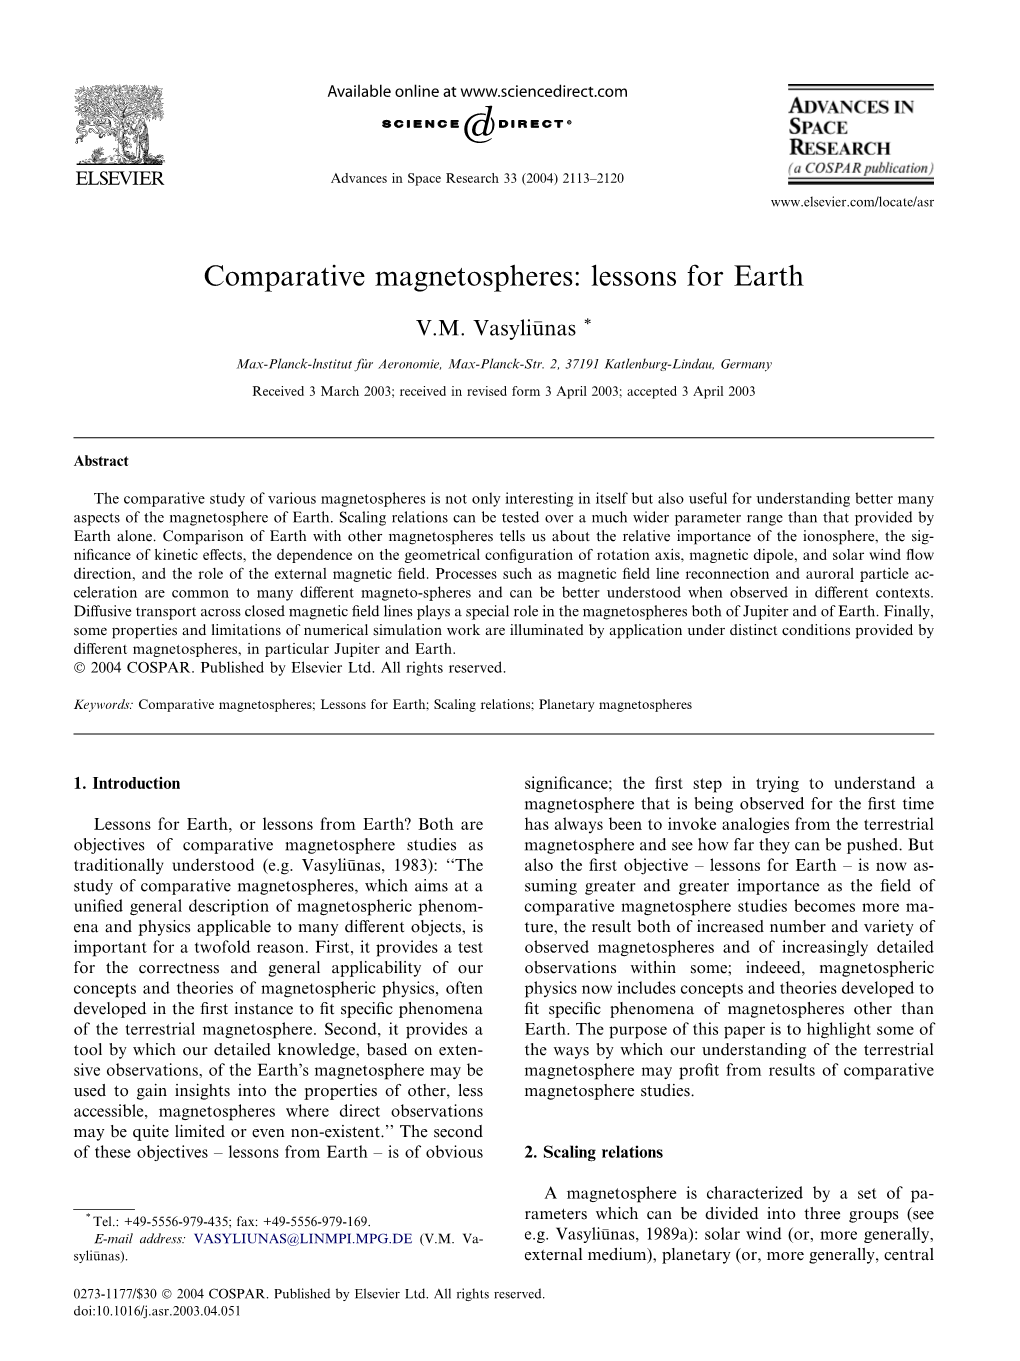 Comparative Magnetospheres: Lessons for Earth